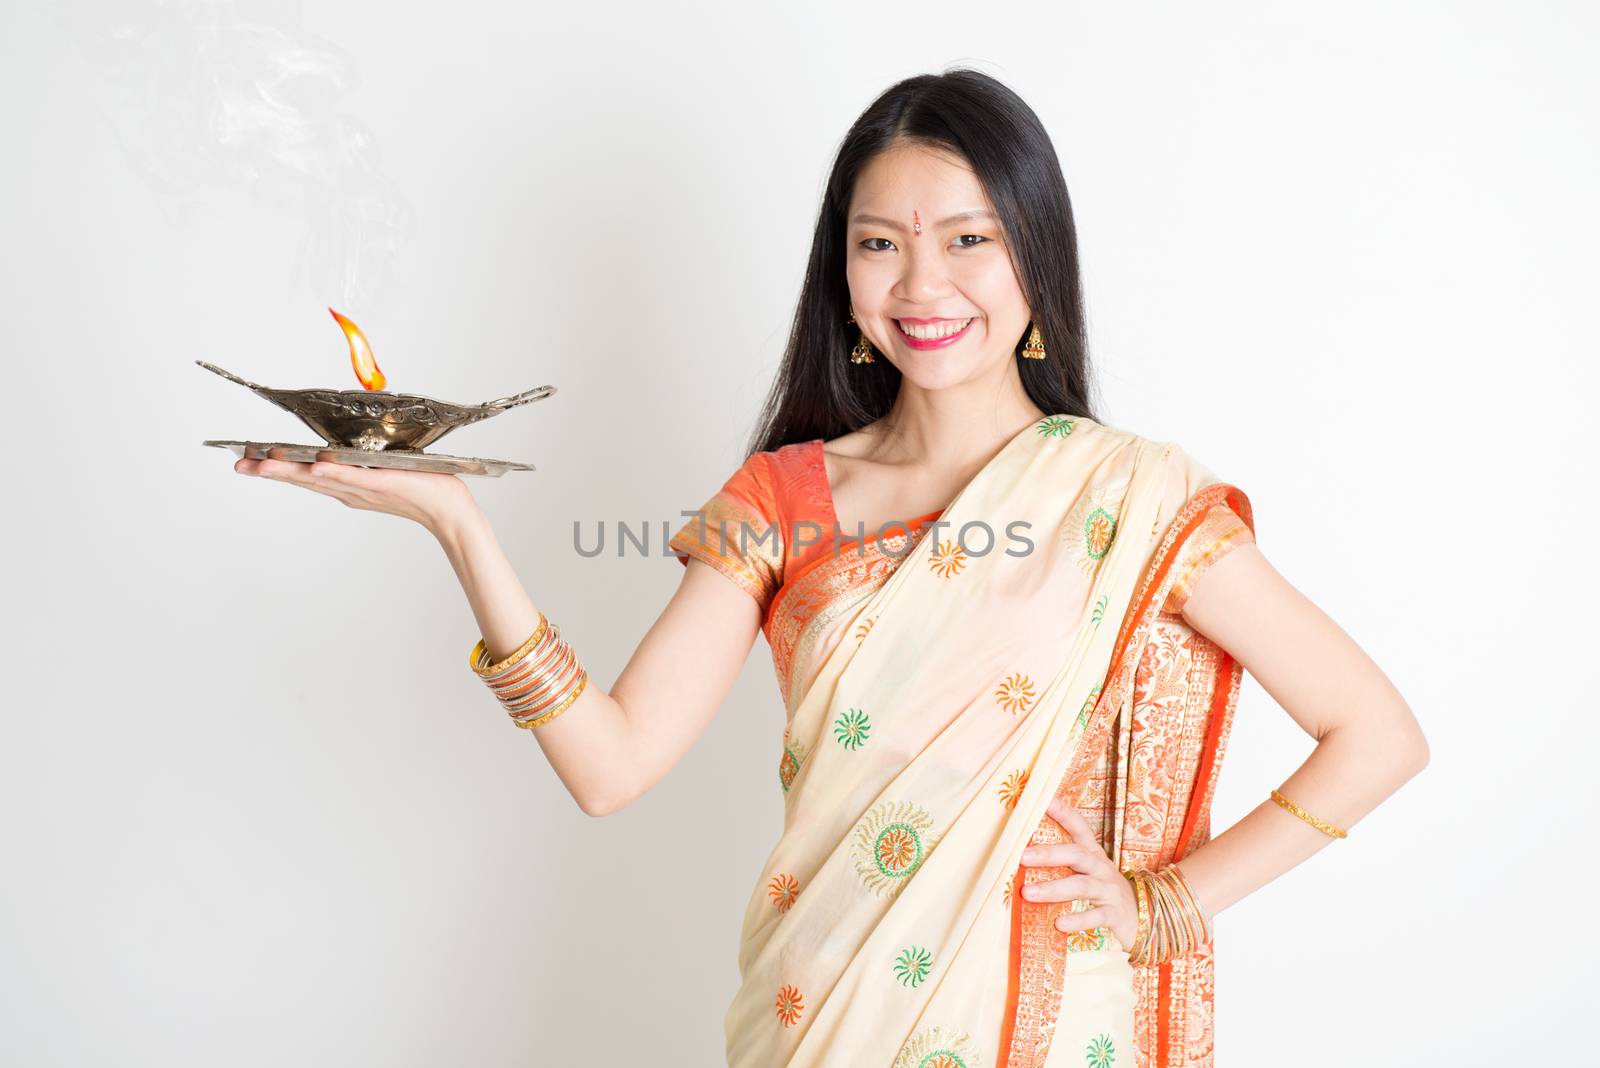 Portrait of young mixed race Indian Chinese female in traditional sari dress, holding diya oil lamp light, on plain background.